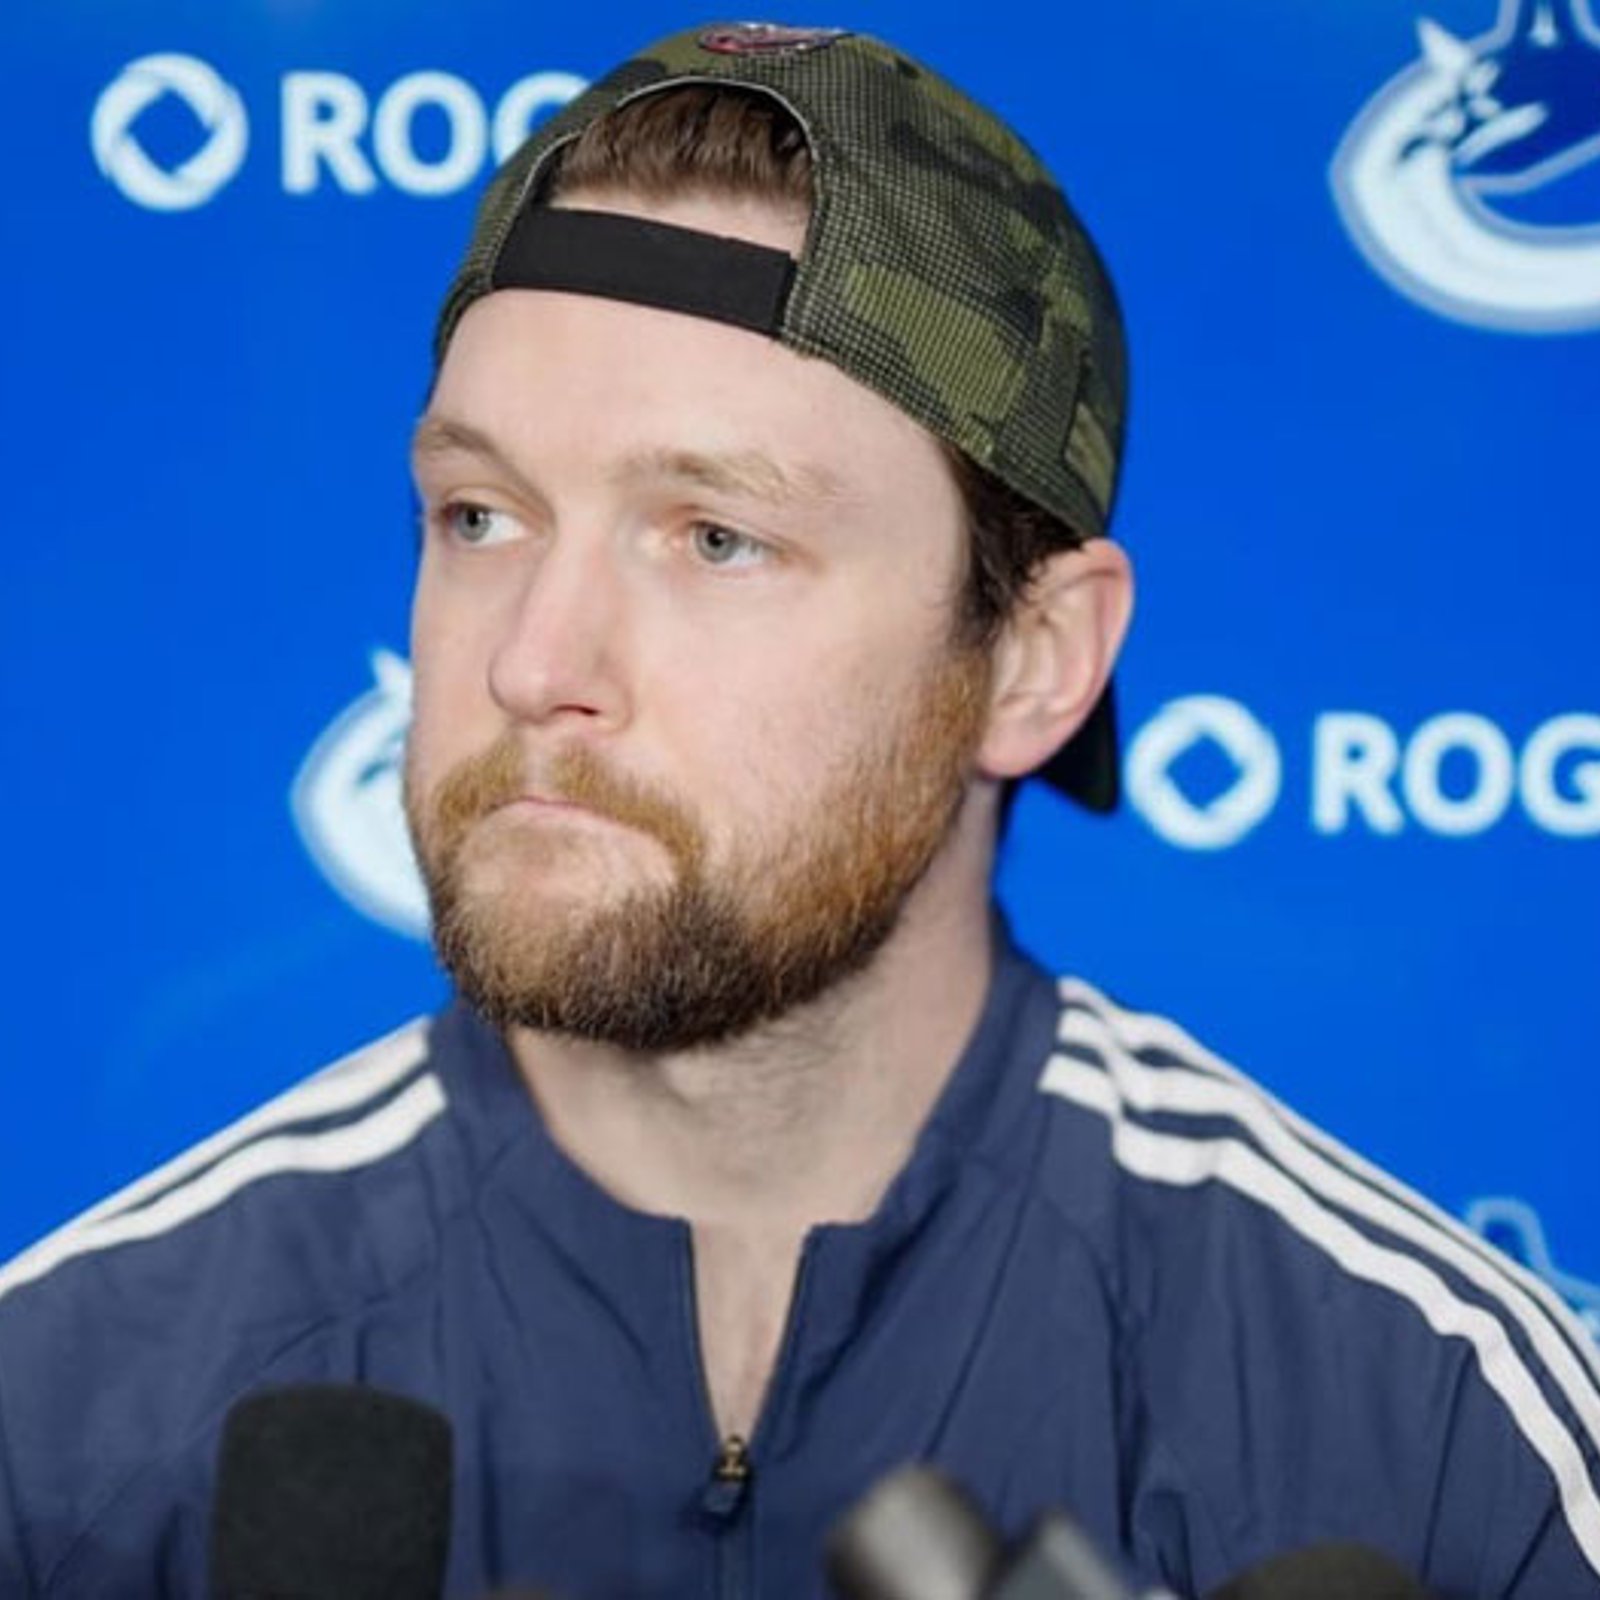 Major update on Thatcher Demko's potentially playoff ending injury